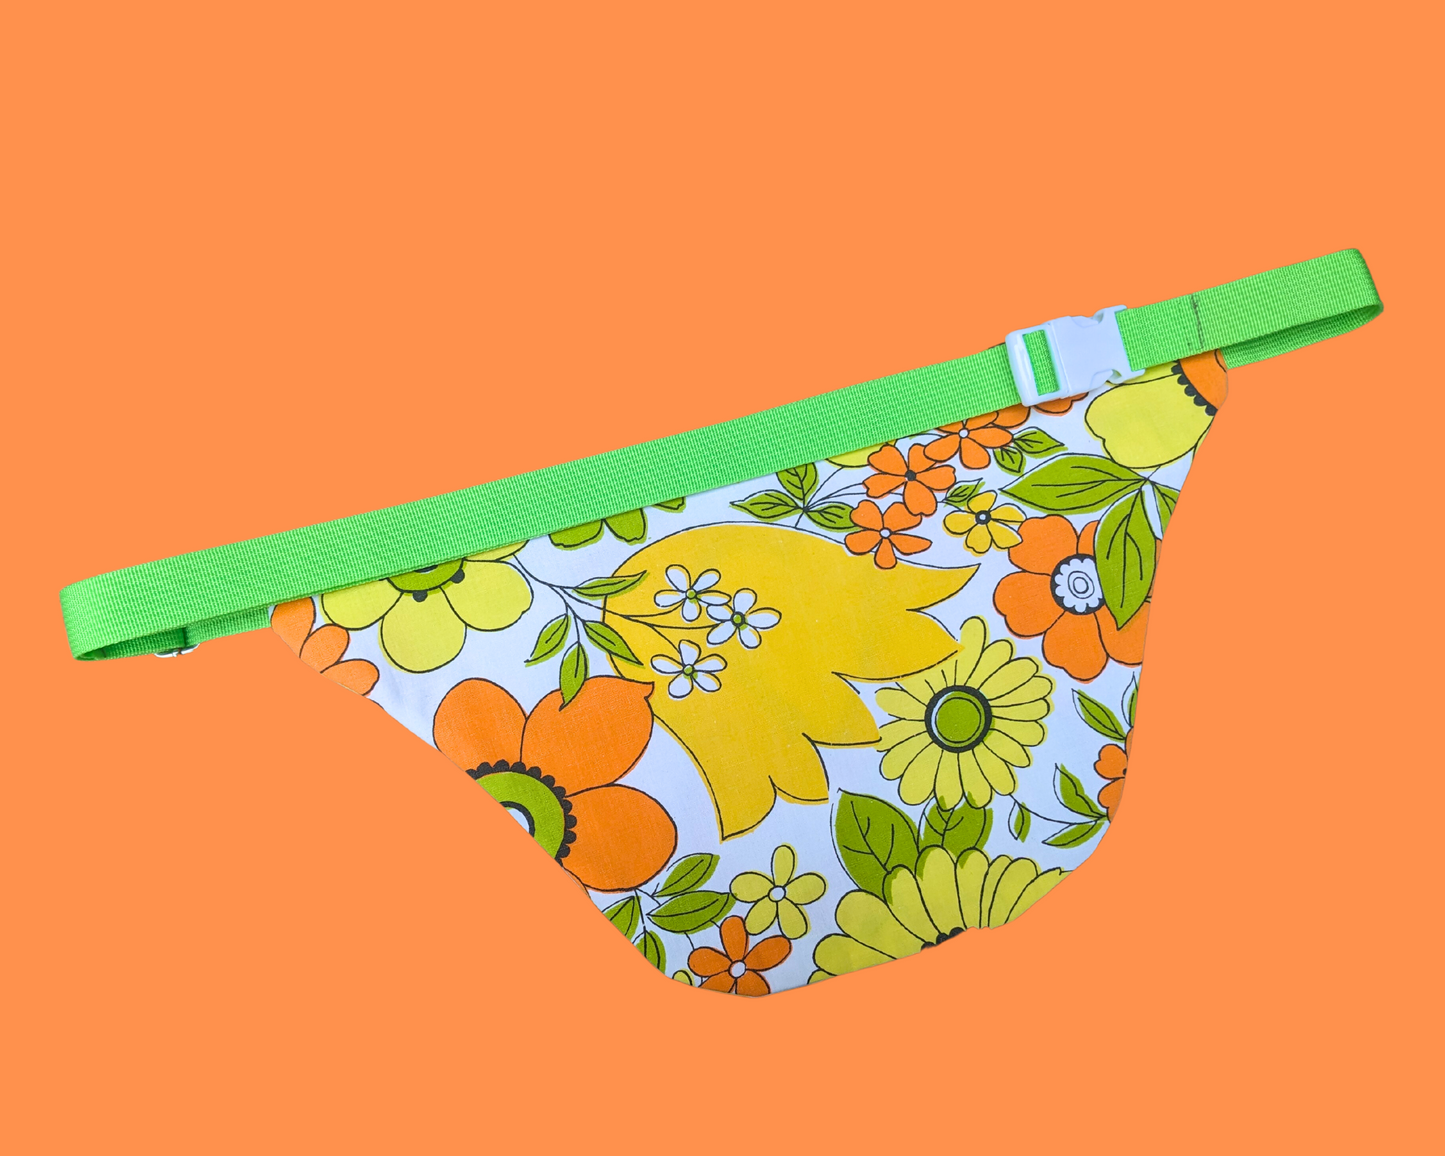 Handmade, Upcycled Vintage Groovy Flower Power Fanny Pack